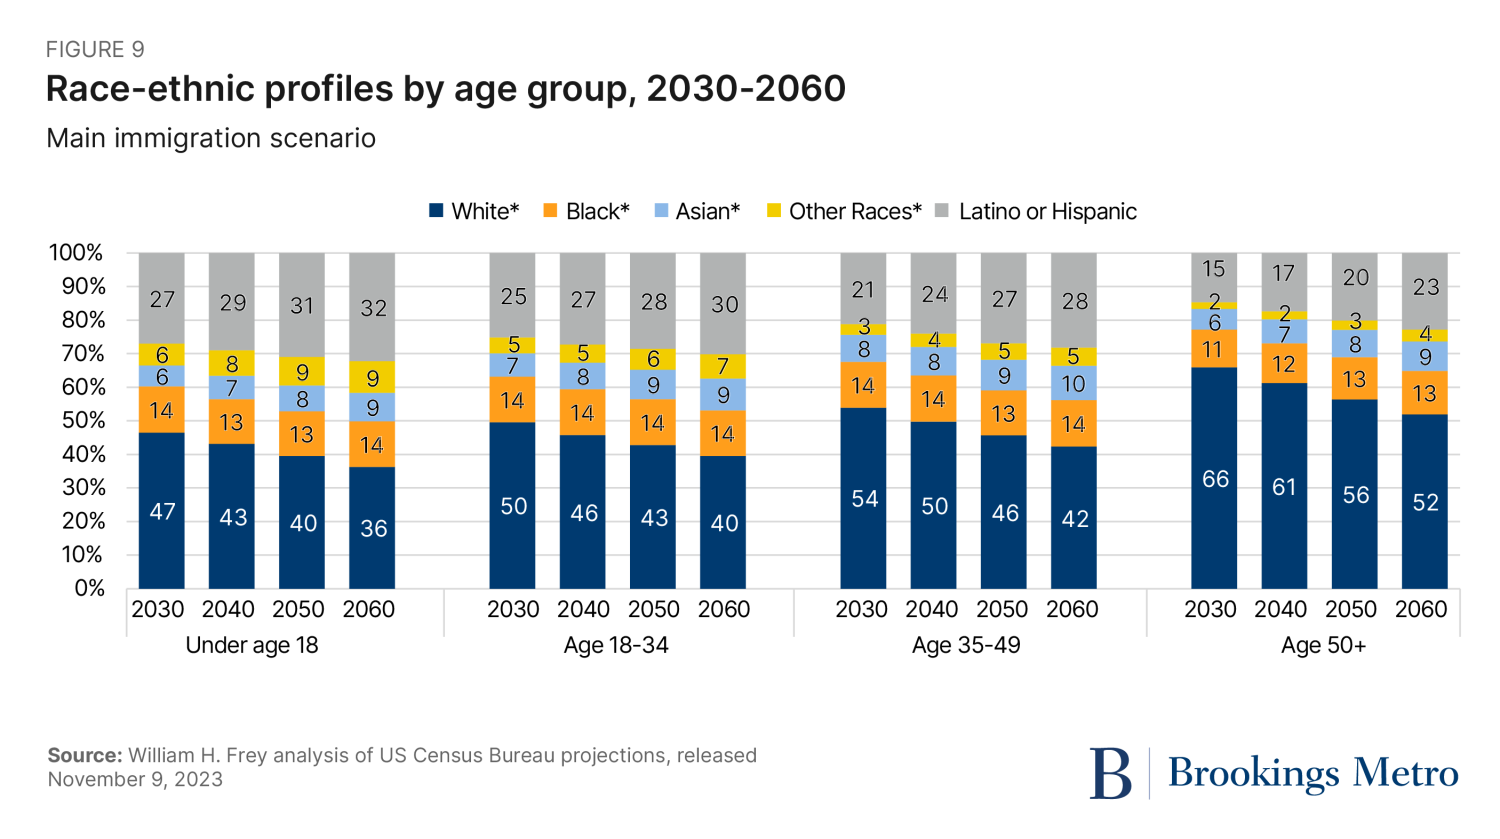 Figure 9. Race-ethnic profiles by age group, 2030-2060